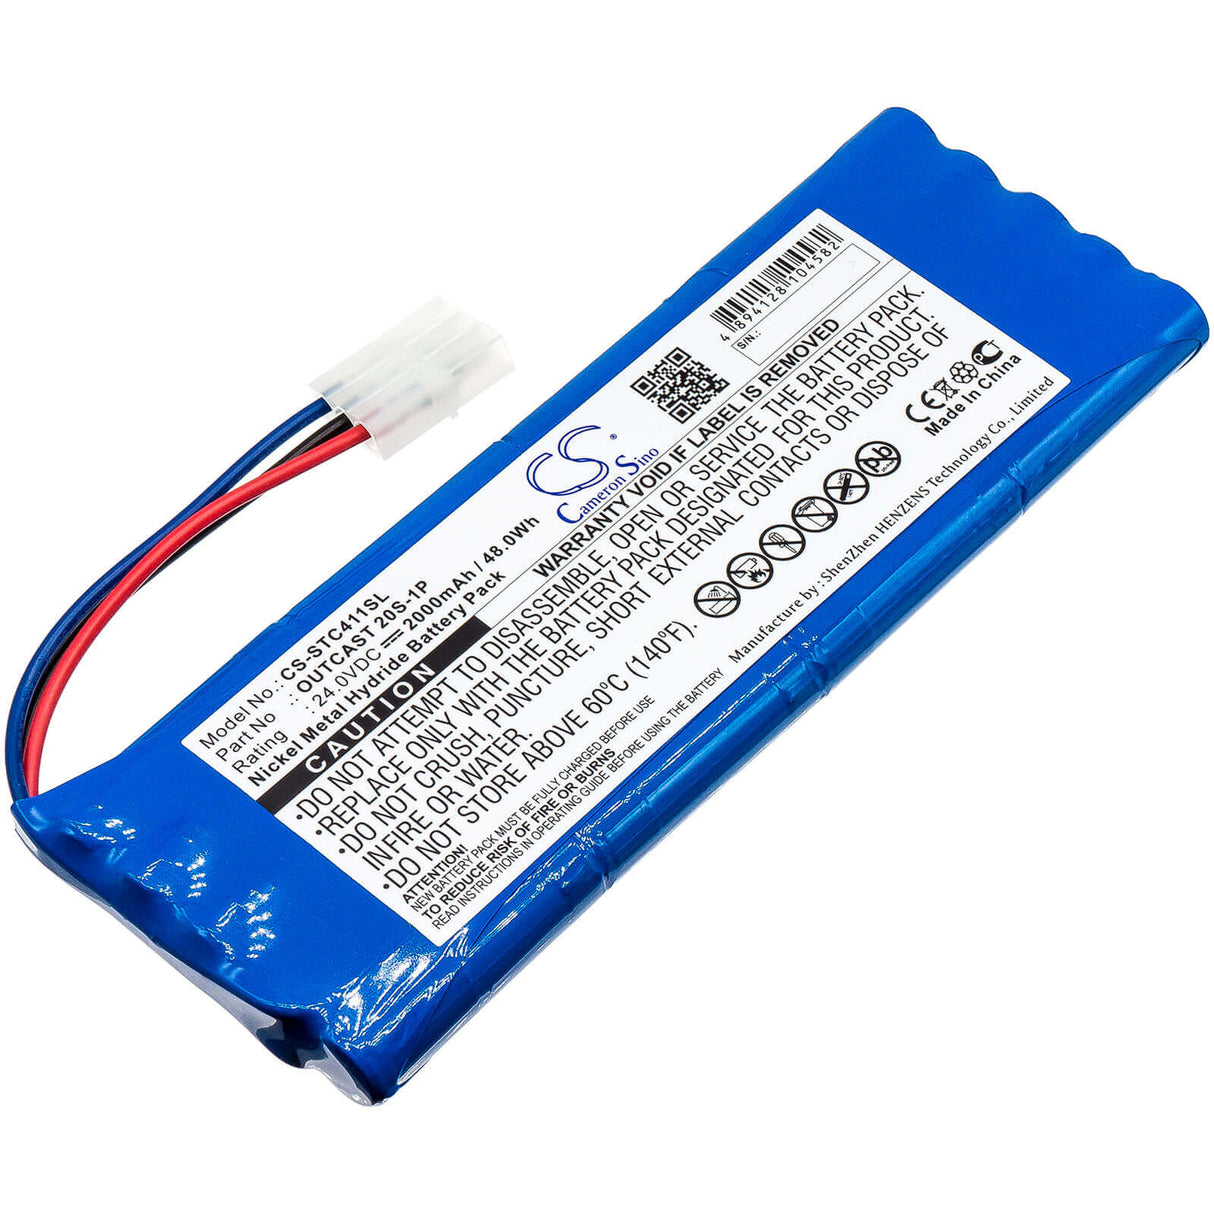 Battery For Soundcast Outcast Ico 421, Ico411a, Ico410, Ico411a-4n 24.0v, 2000mah - 48.00wh Batteries for Electronics Cameron Sino Technology Limited   